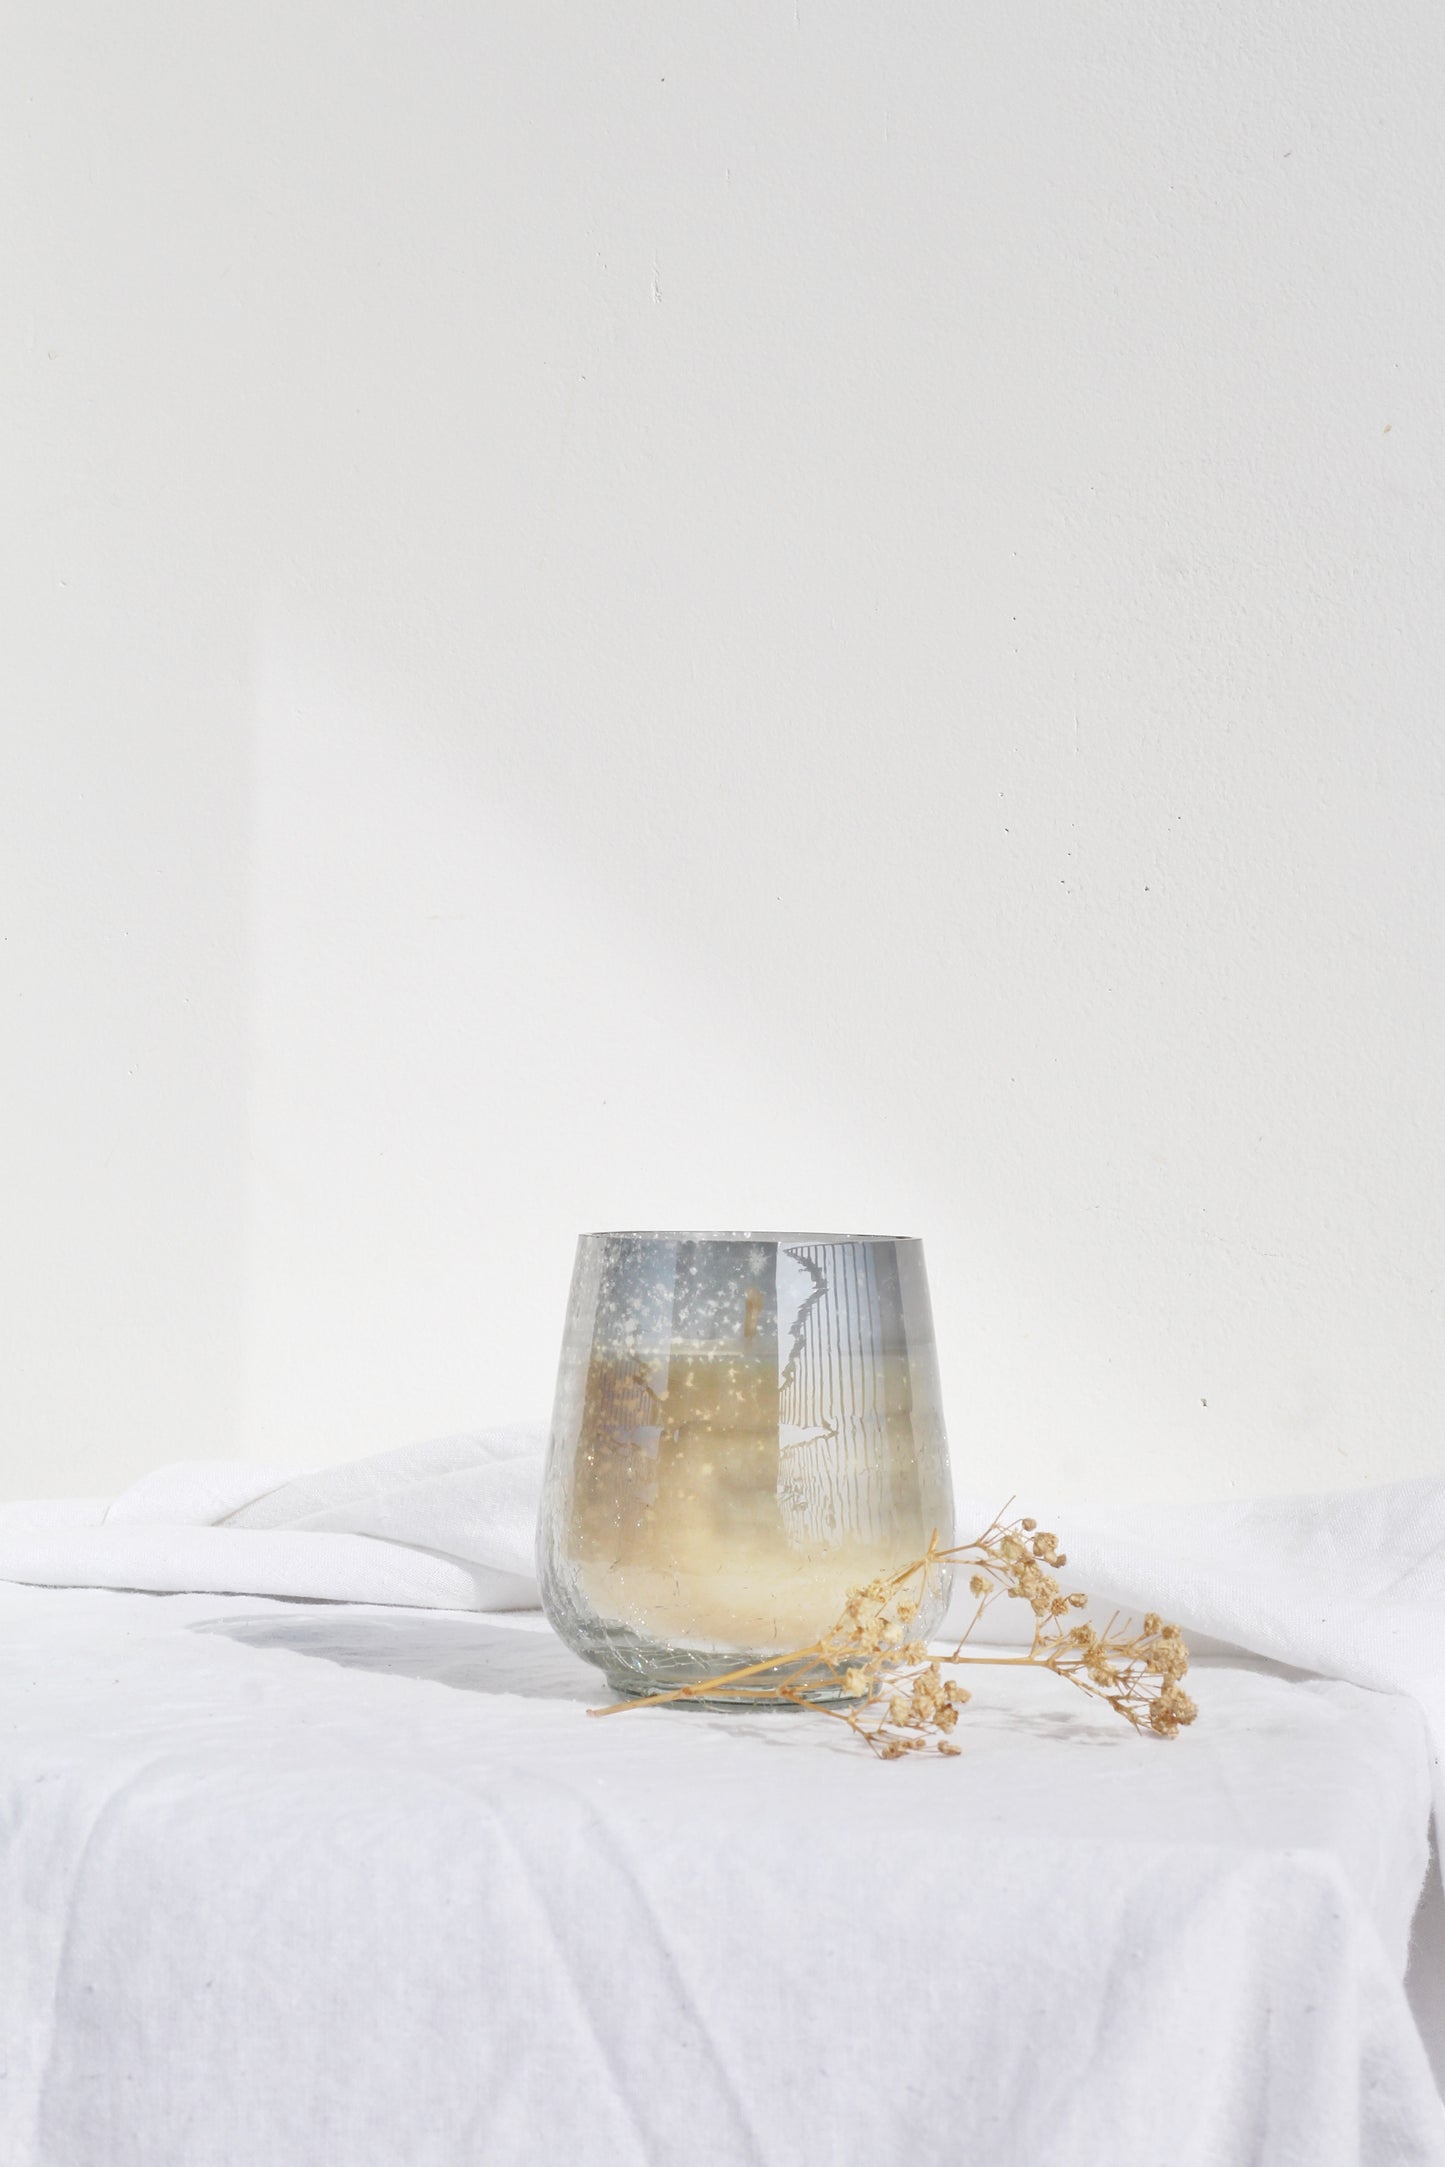 Silver Crackle Votive Soy Candle